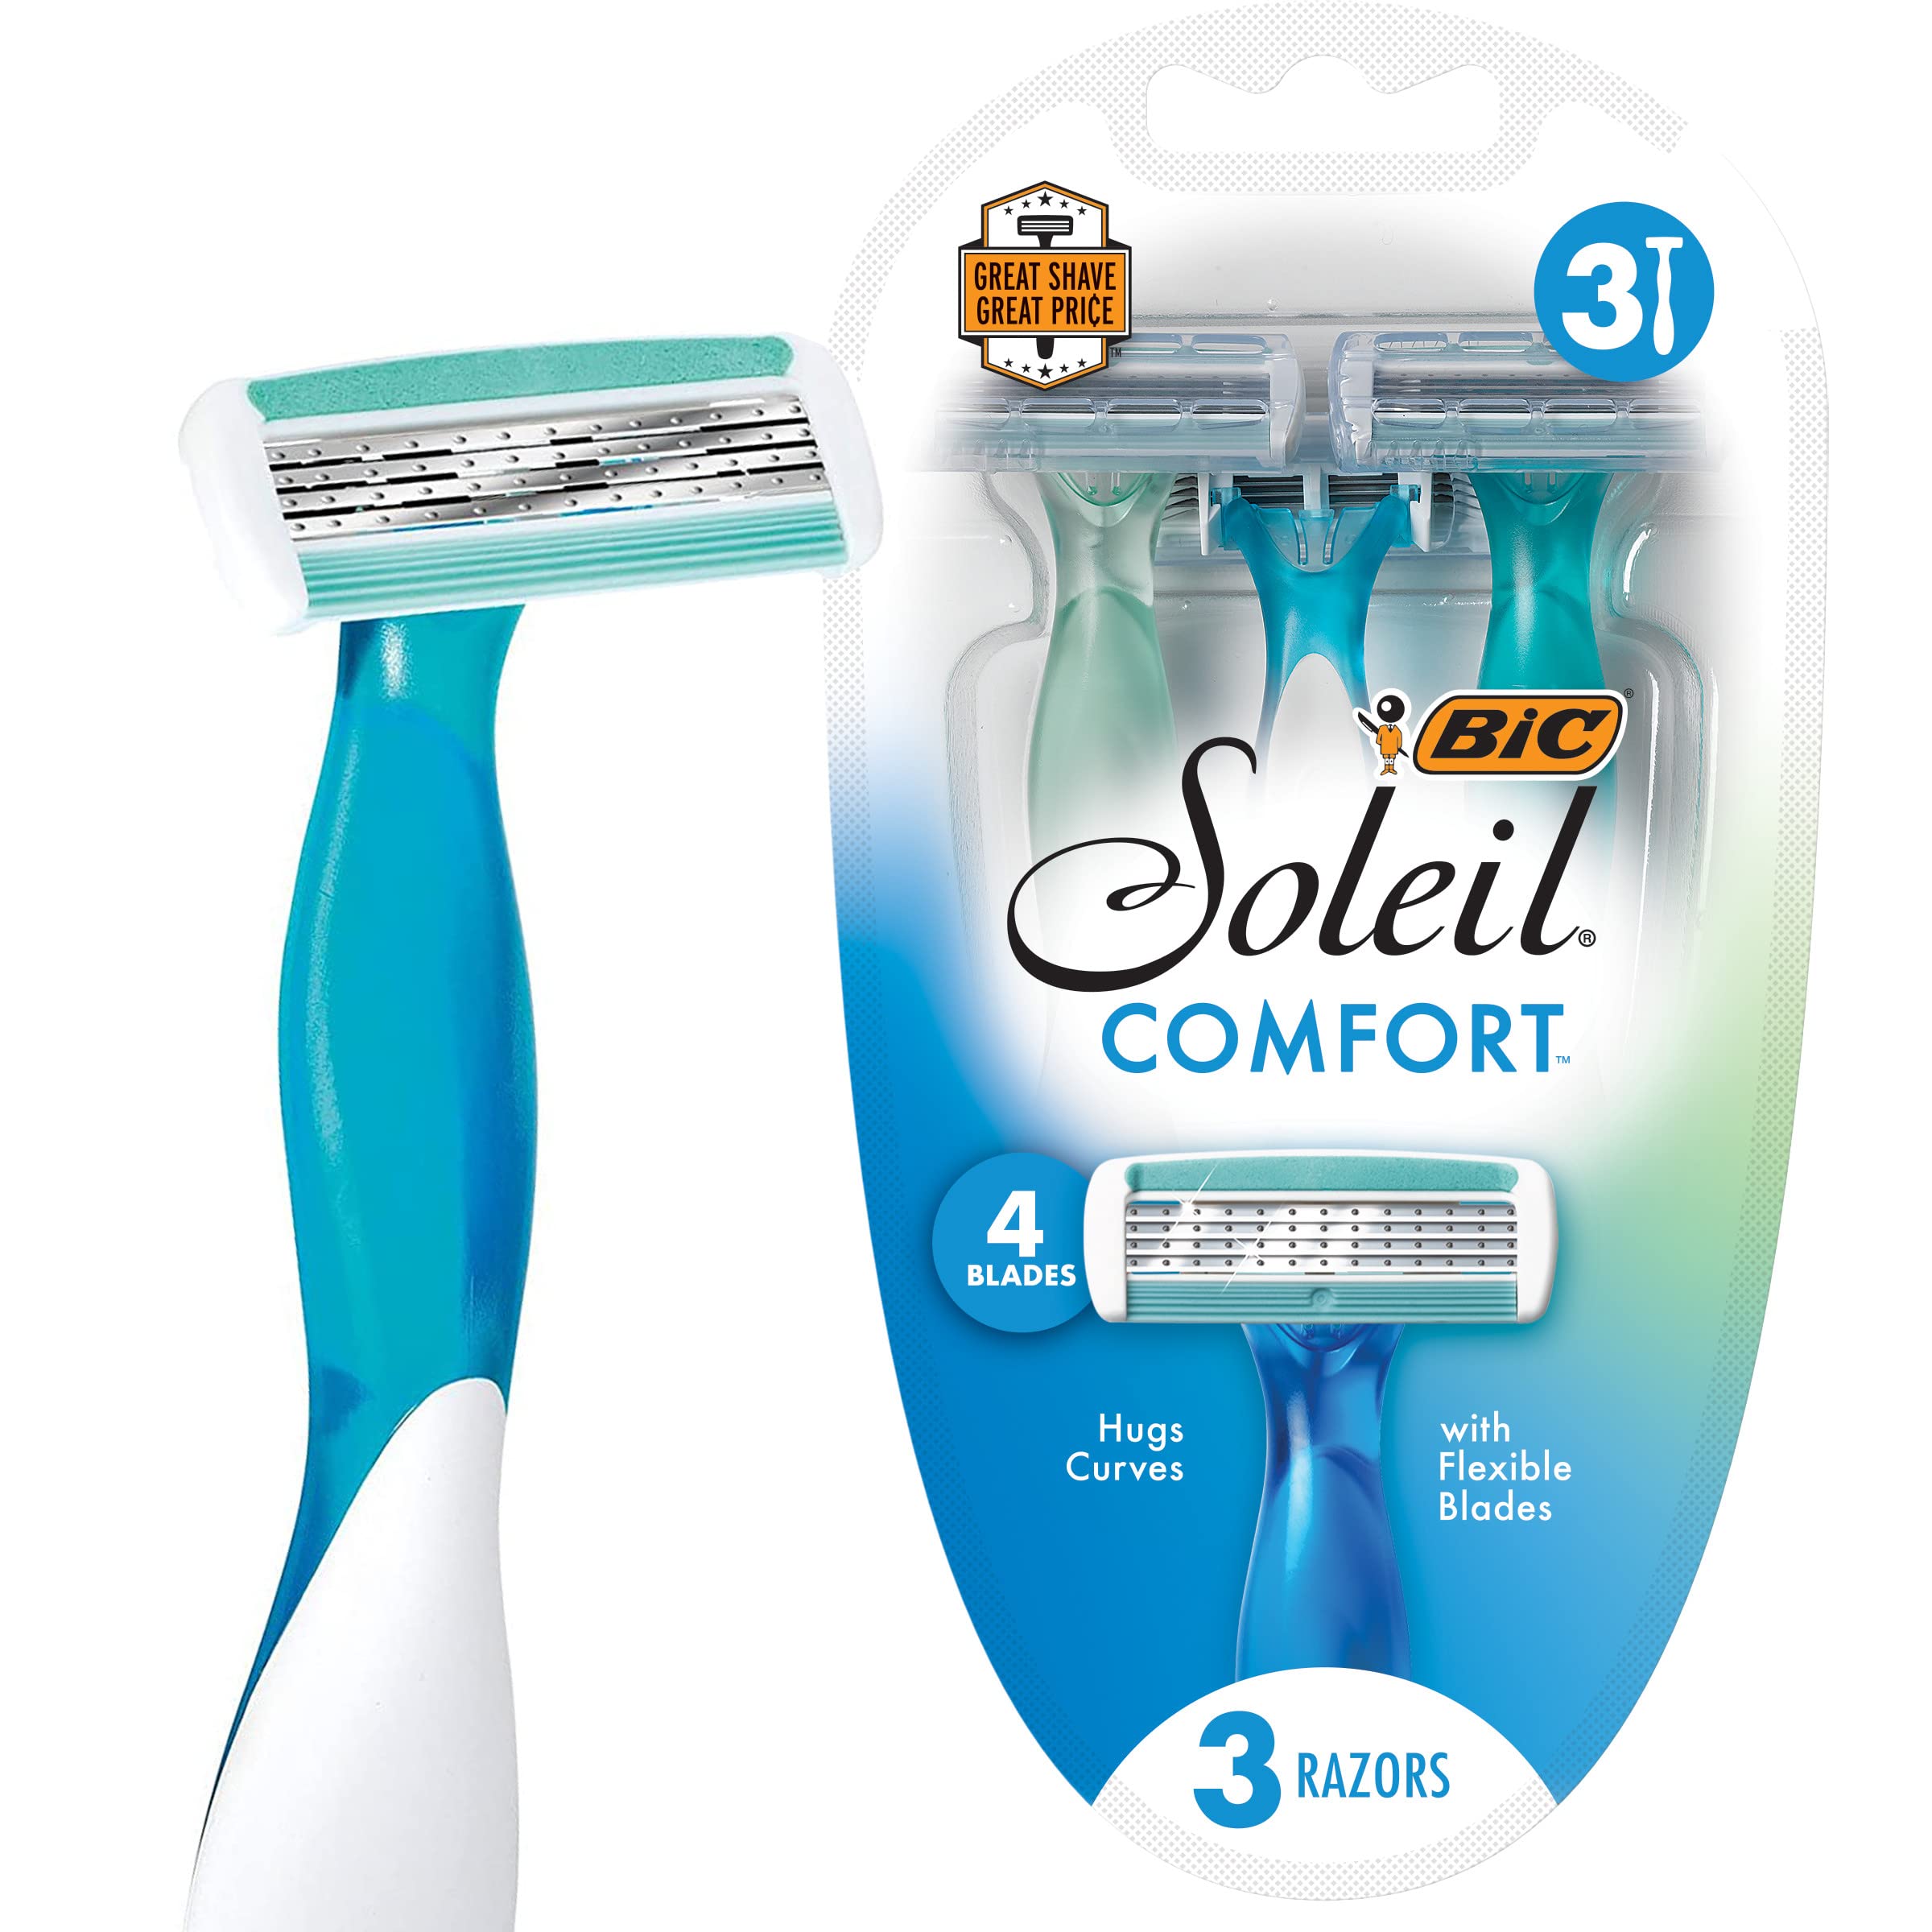 BIC Soleil Comfort 4-Blade Disposable Razors for Women Sensitive Skin Razor for a Smooth and Close Shave, 3 Piece Razor Set for $1.79